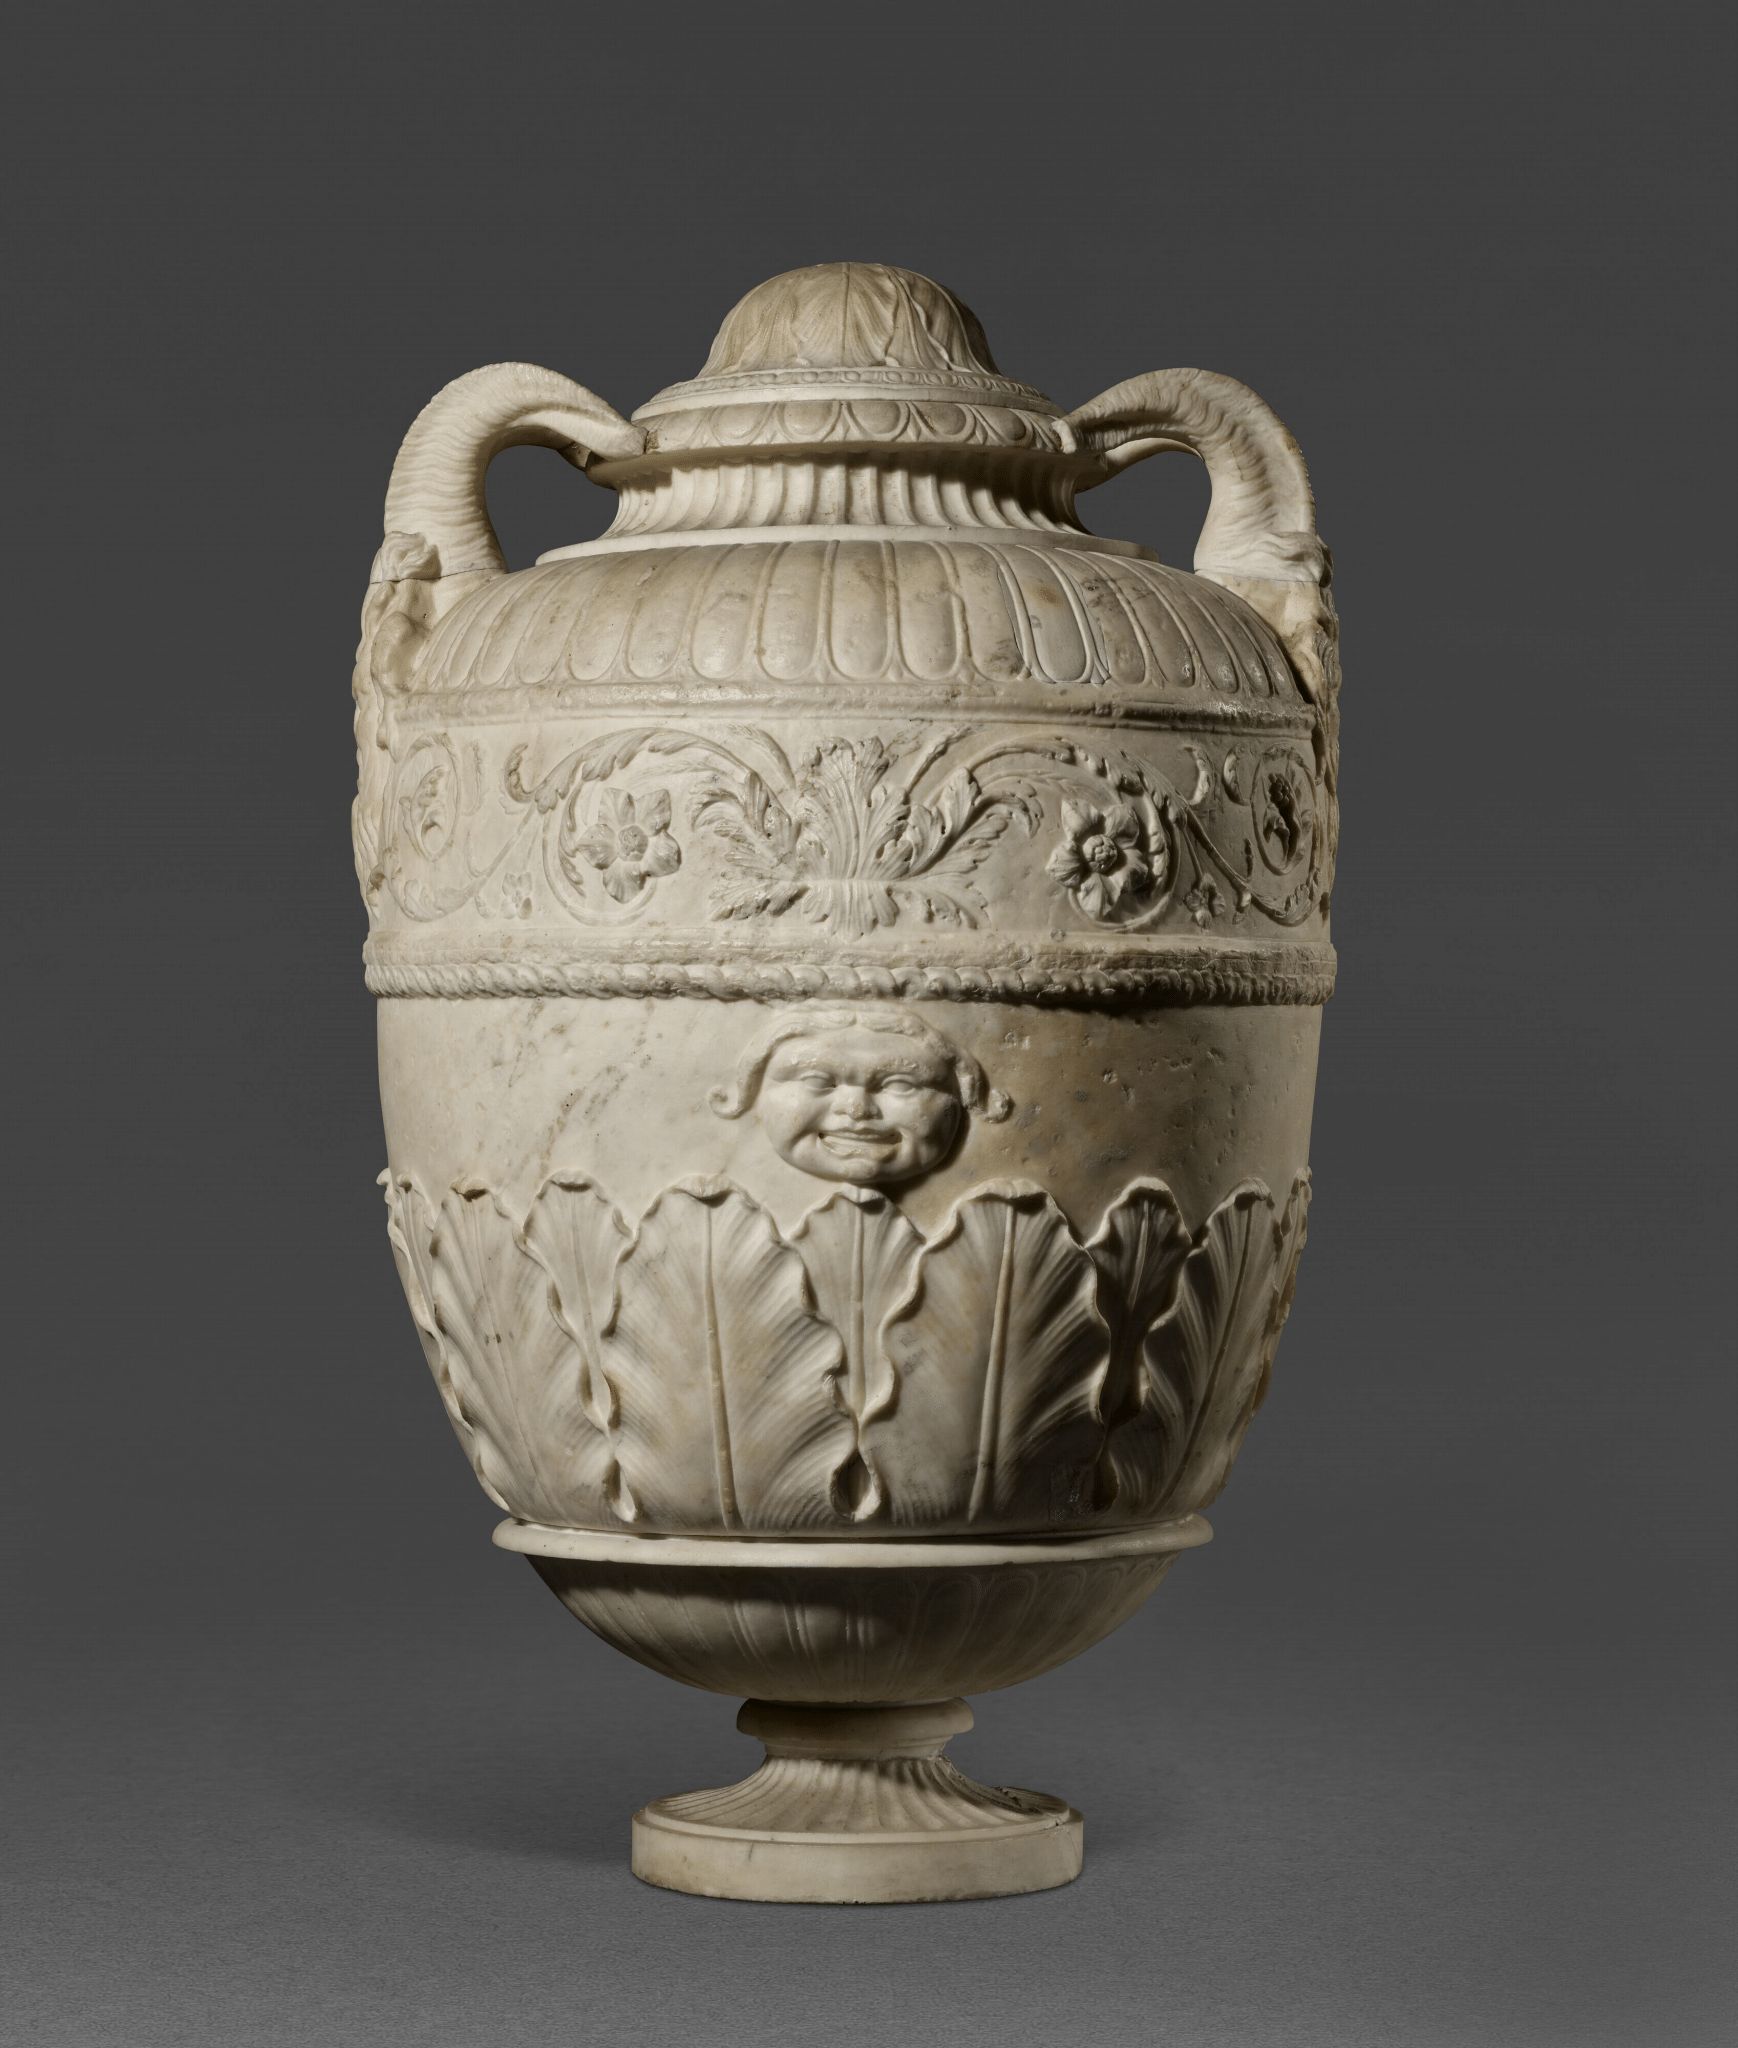 A Roman marble cinerary urn